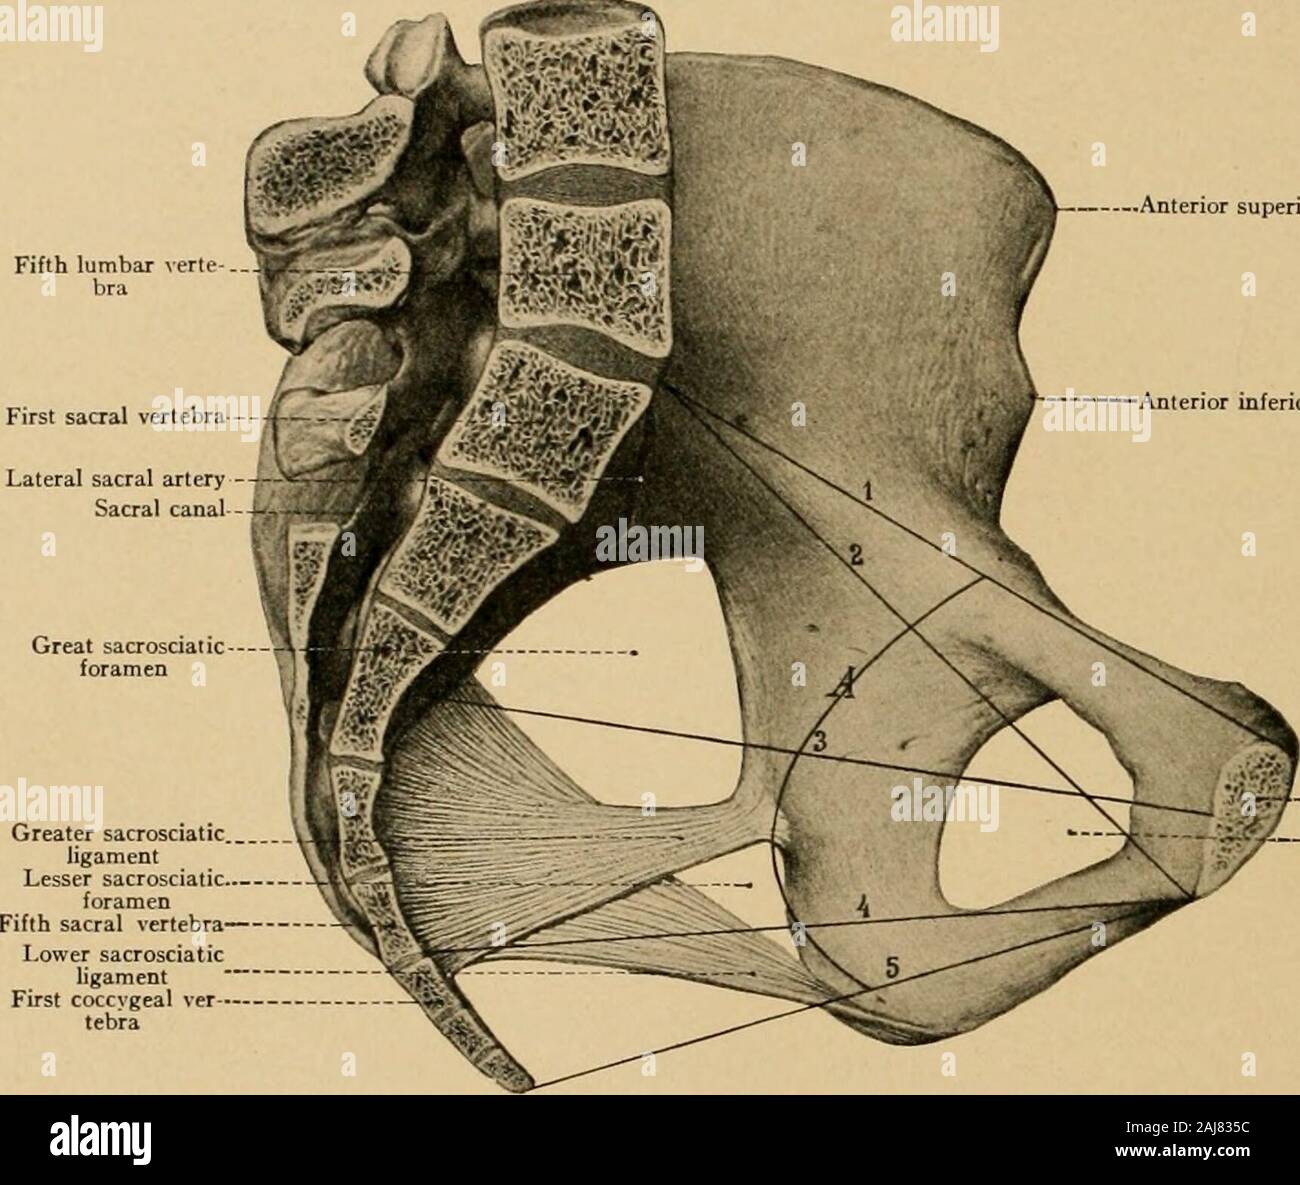 https://c8.alamy.com/comp/2AJ835C/atlas-and-text-book-of-topographic-and-applied-anatomy-the-pelvic-cavity-or-the-width-of-the-pelvis-from-themiddle-of-the-symphysis-to-the-middle-of-the-third-sacral-vertebra-125-centimeters-5-inches-anterior-superior-spine-of-i-anterior-inferior-spine-of-iliu-mphysisobturator-foramen-fig-70a-sagittal-section-of-the-female-pelvis-with-the-anteroposterior-pelvic-diameters-i-the-anteropos-terior-diameter-of-the-pelvic-inlet-conjugata-vera-2-the-internal-conjugate-diagonal-conjugata-diagonalis-3the-anteroposterior-diameter-of-the-pelvic-cavity-4-the-anteroposterior-diame-2AJ835C.jpg